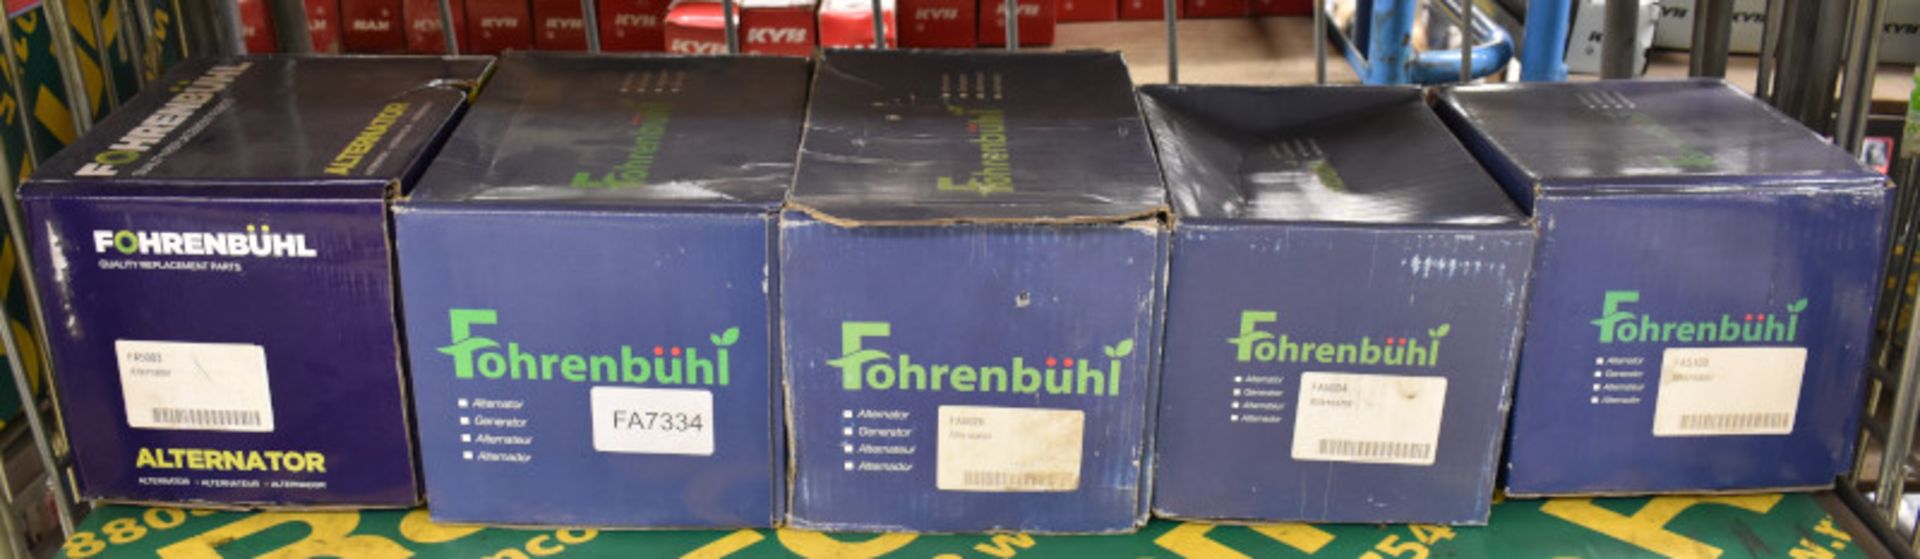 5x Fohrenbuhl Alternators - Please see pictures for model numbers